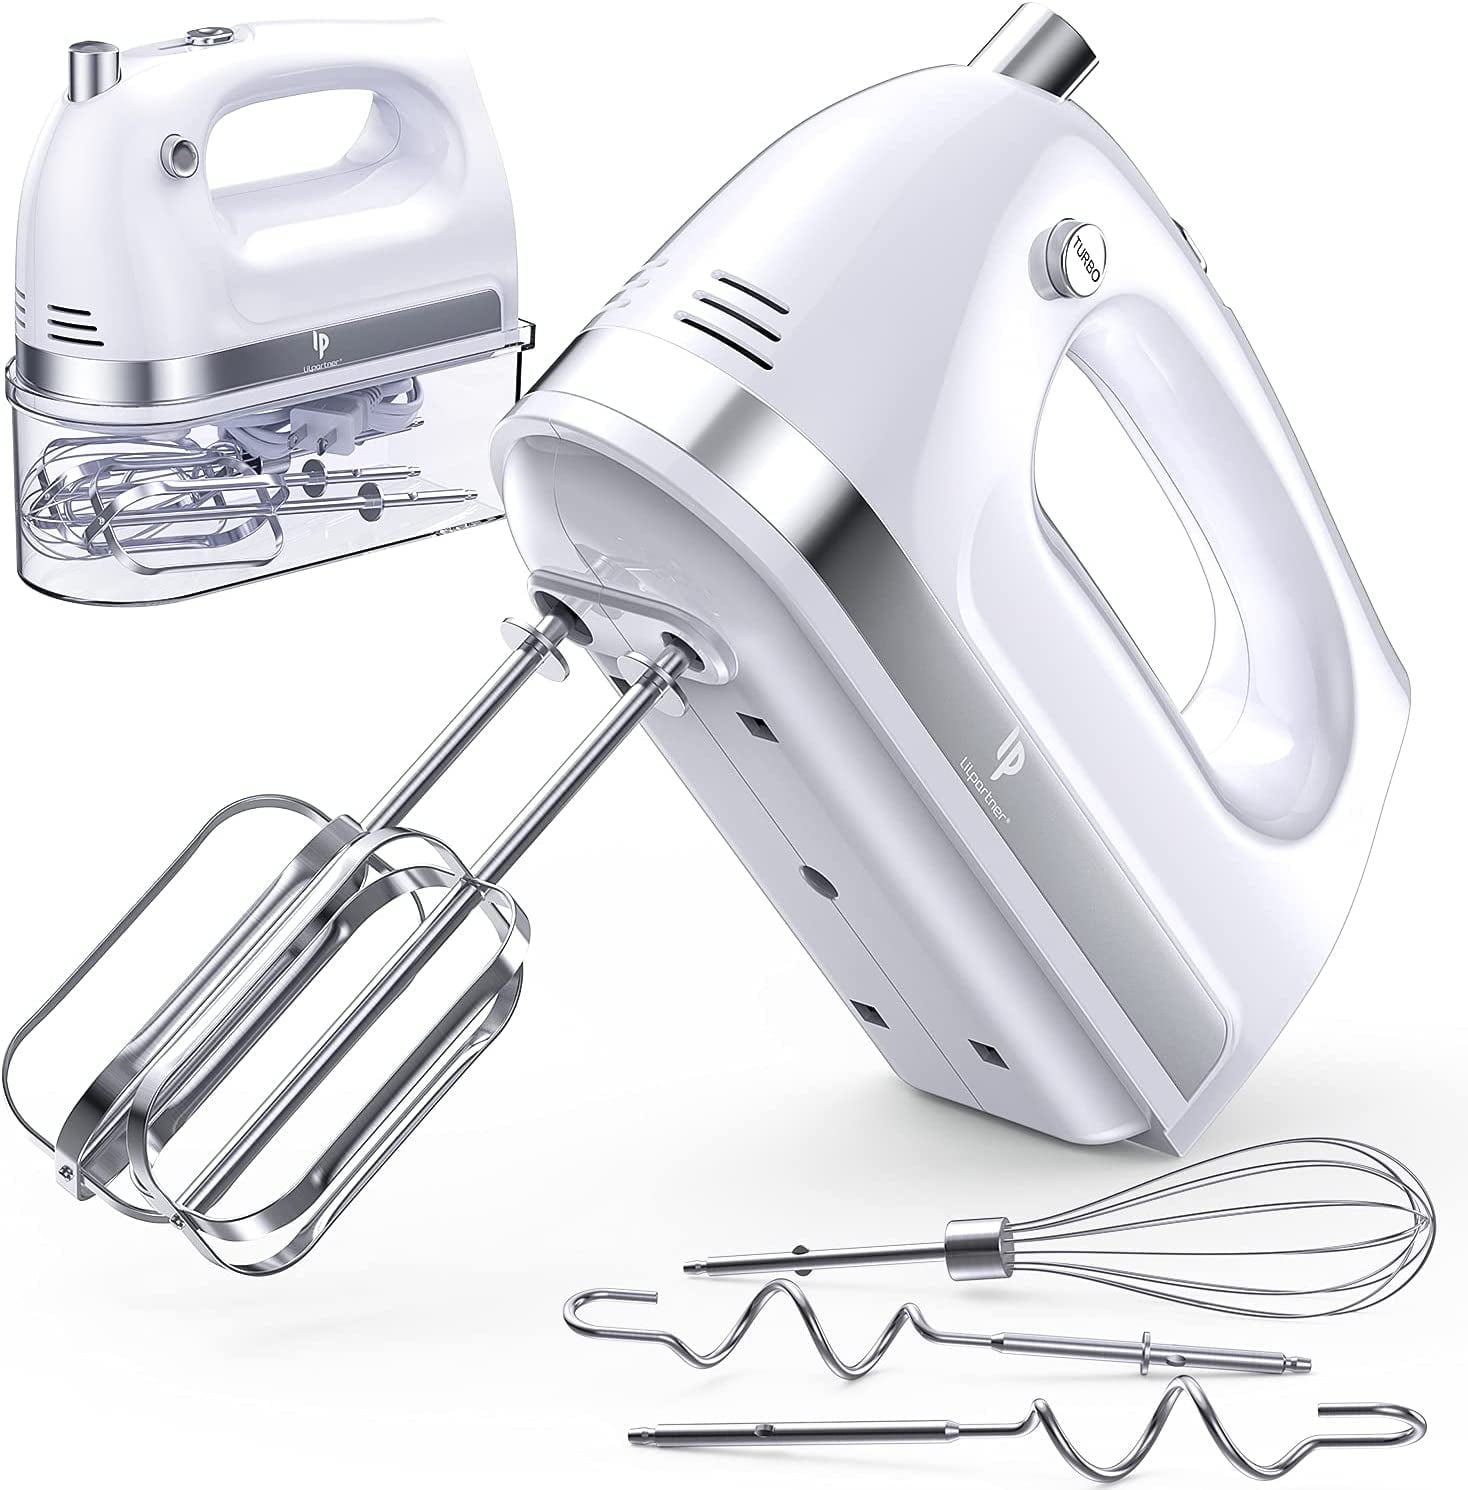 Hand Mixer Electric,Kestreln 5-Speed Mixer Electric Handheld,350W Turbo  Powerful Mixers with 4 Stainless Steel Accessories for Kitchen baking